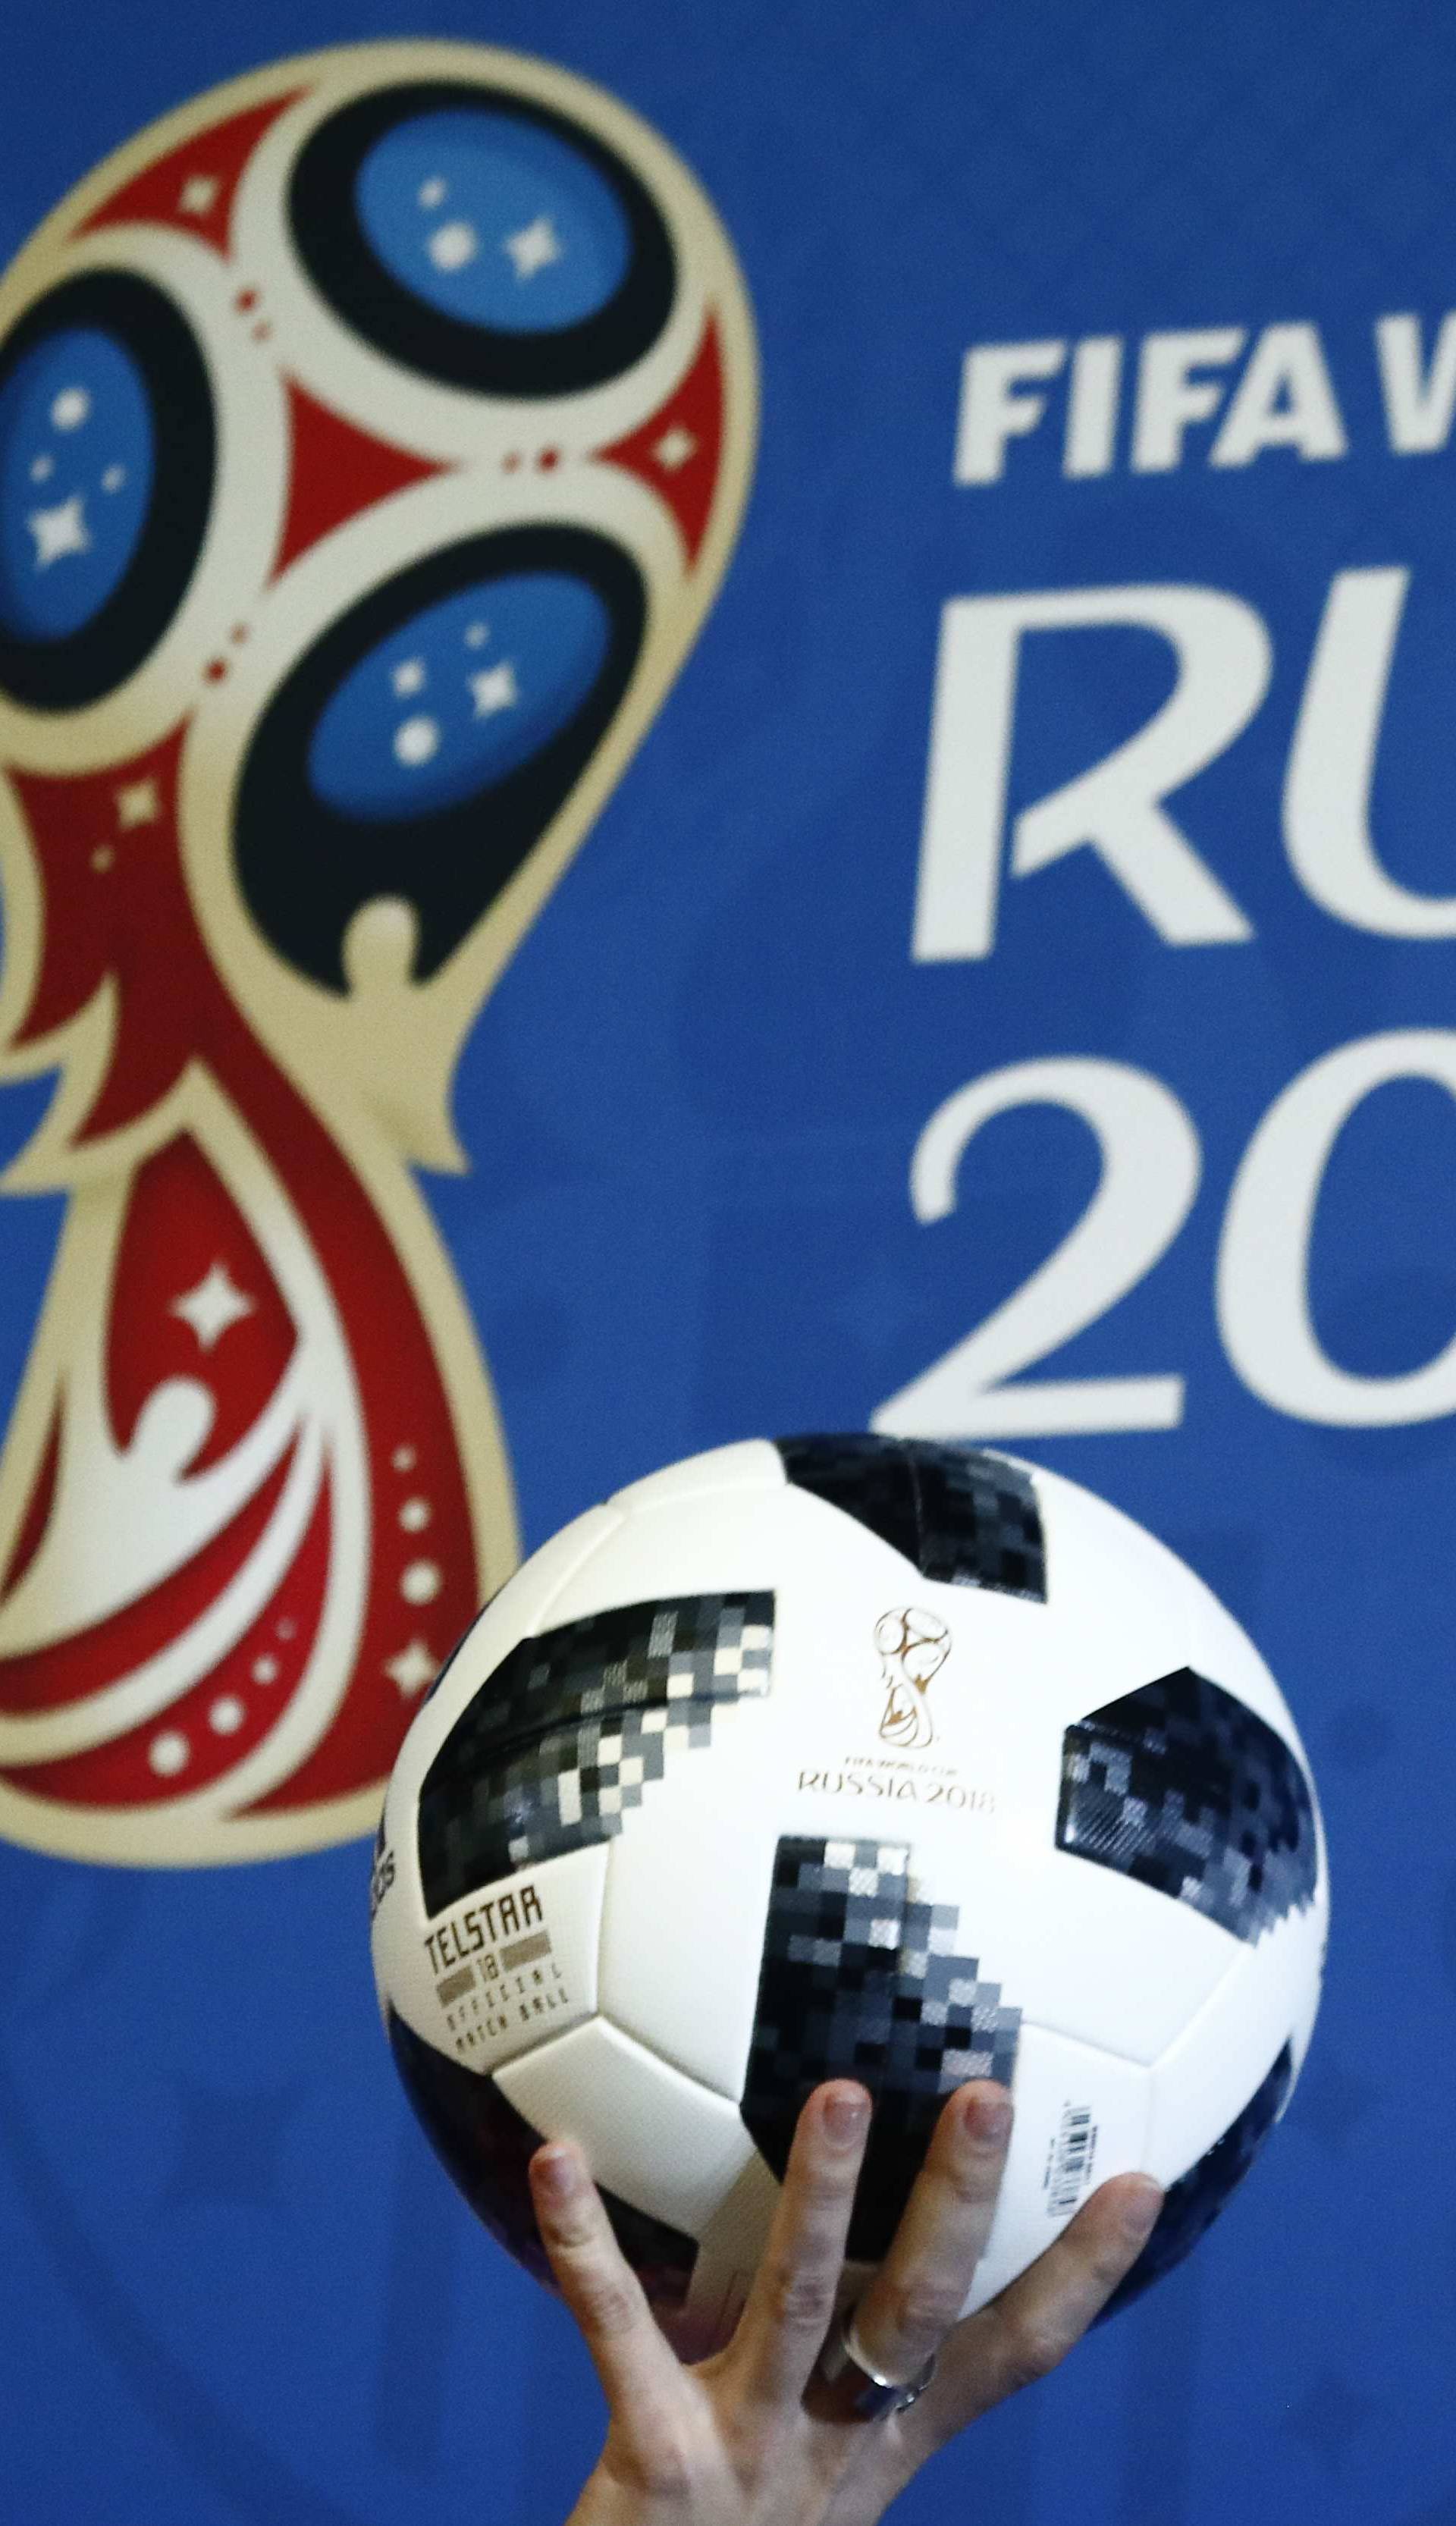 A presenter holds the official match ball for the 2018 FIFA World Cup Russia during an event to announce the new 2018 FIFA Fan Fest Ambassadors in Moscow